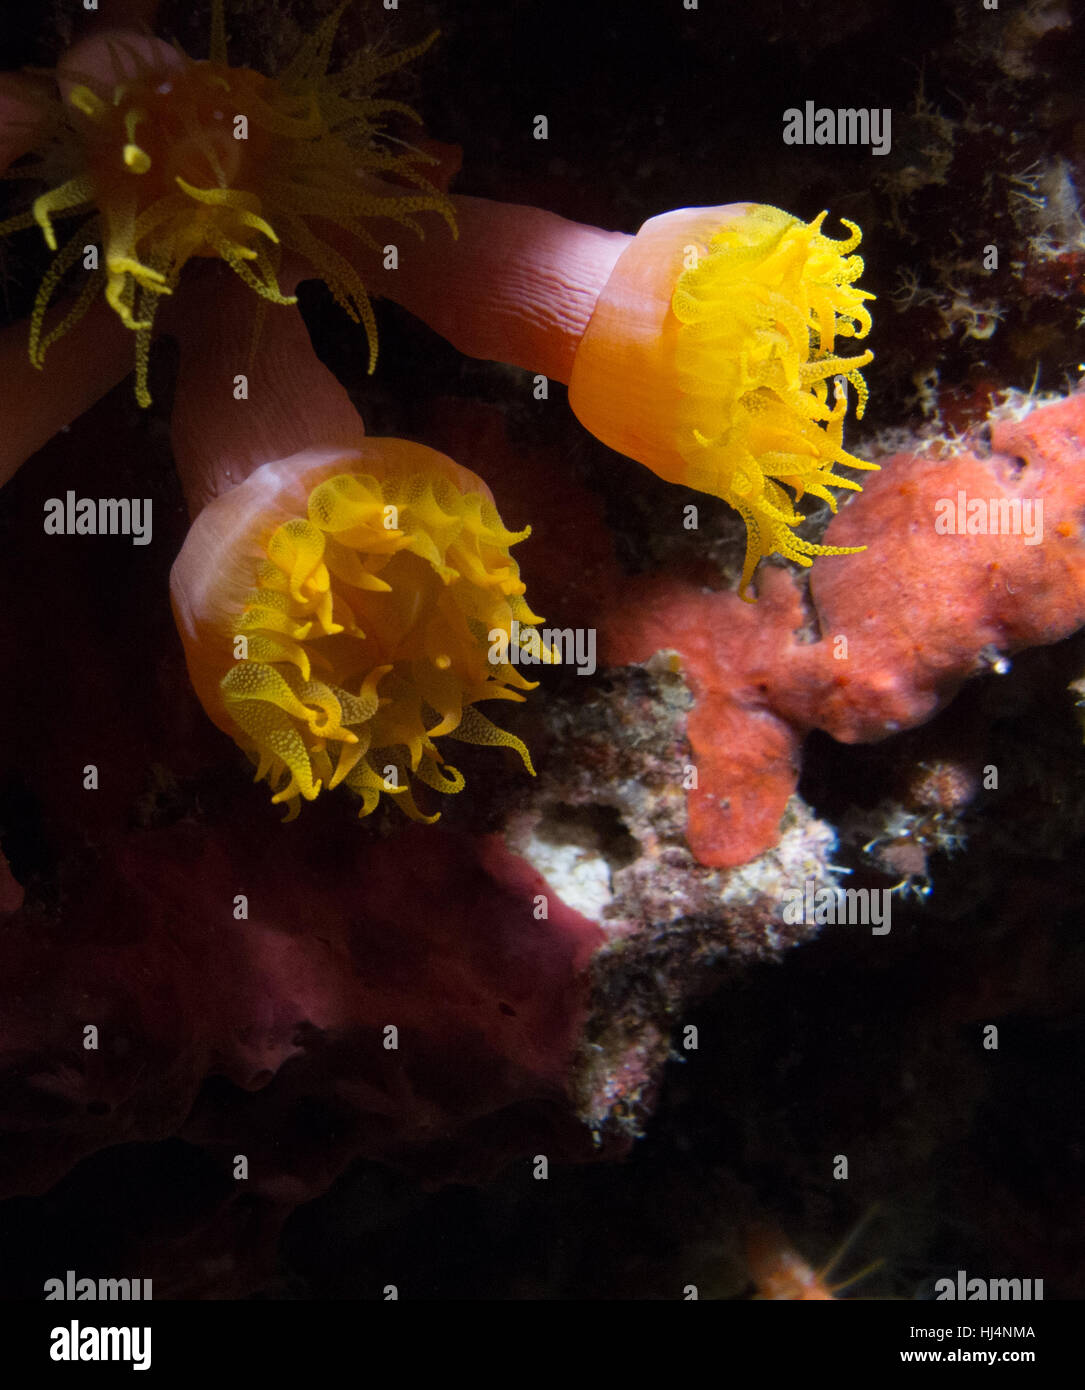 Colourful sun coral with yellow and pink colour Stock Photo